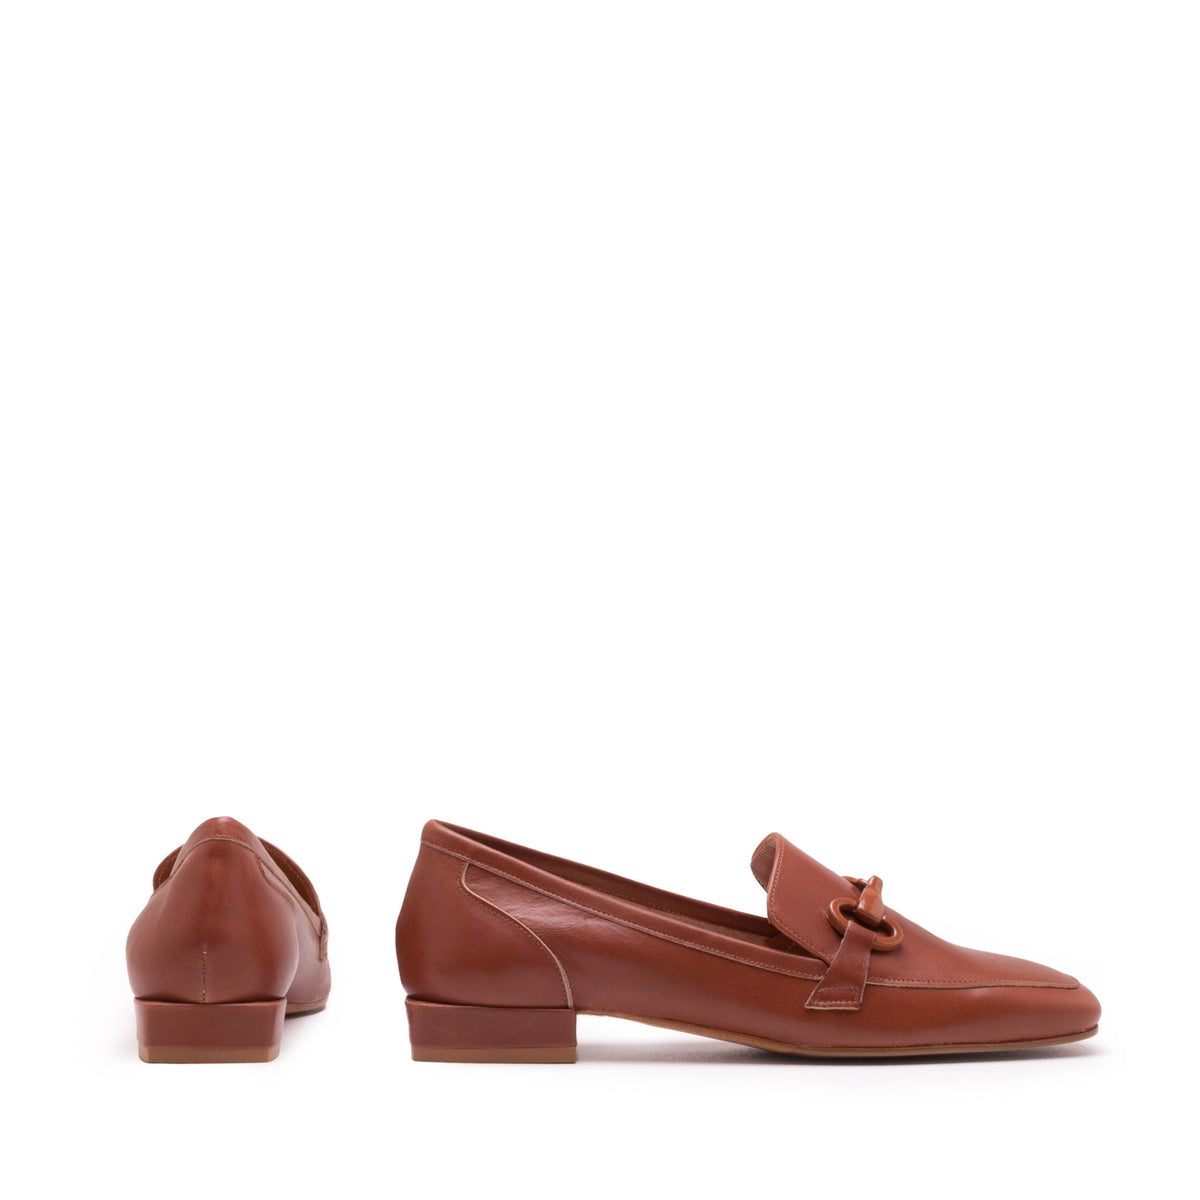 TANIA LOAFERS